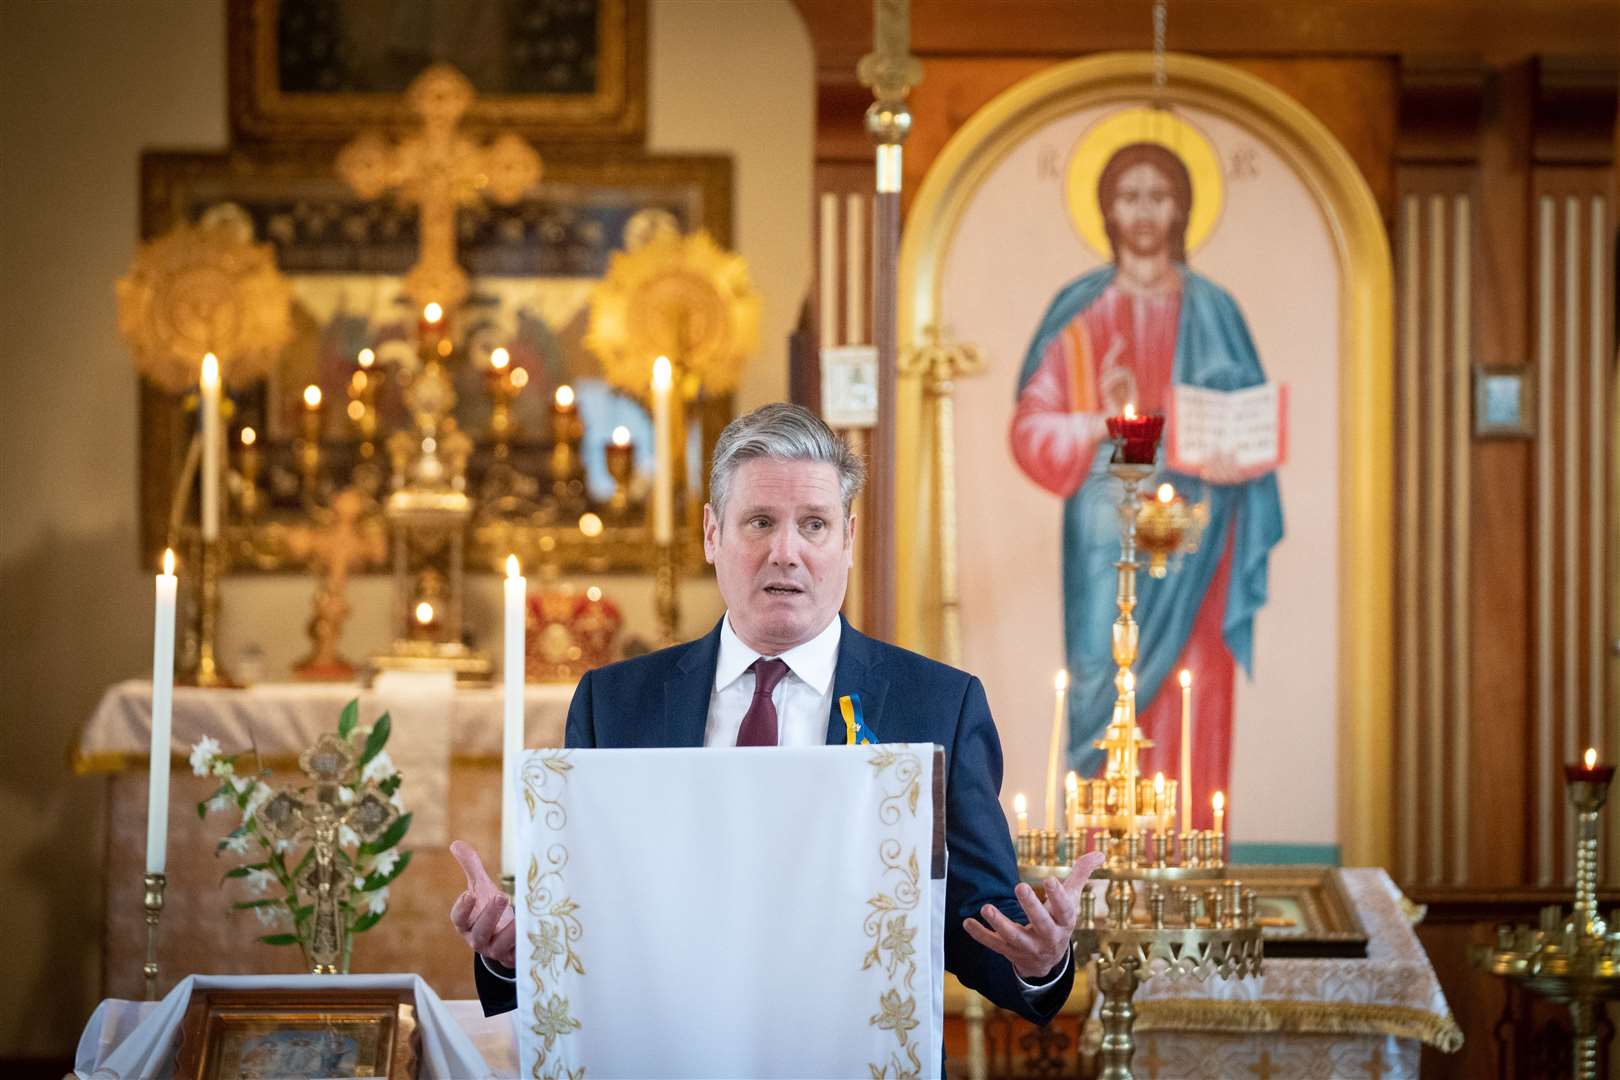 Sir Keir Starmer gave a speech during his visit on Tuesday (Stefan Rousseau/PA)